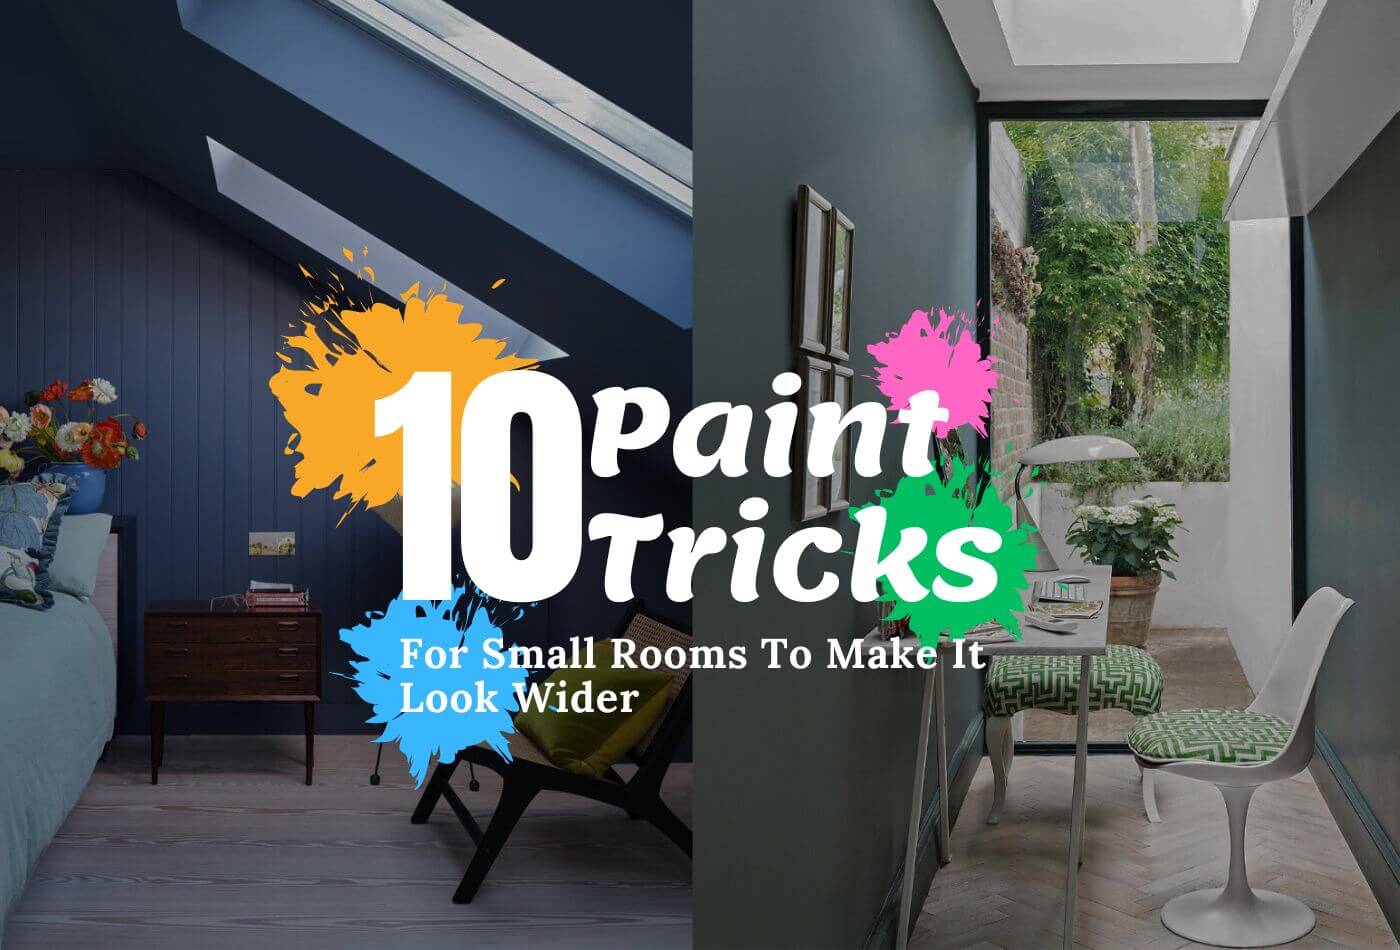 Top 10 Paint Tricks For Small Rooms To Make It Look Wider